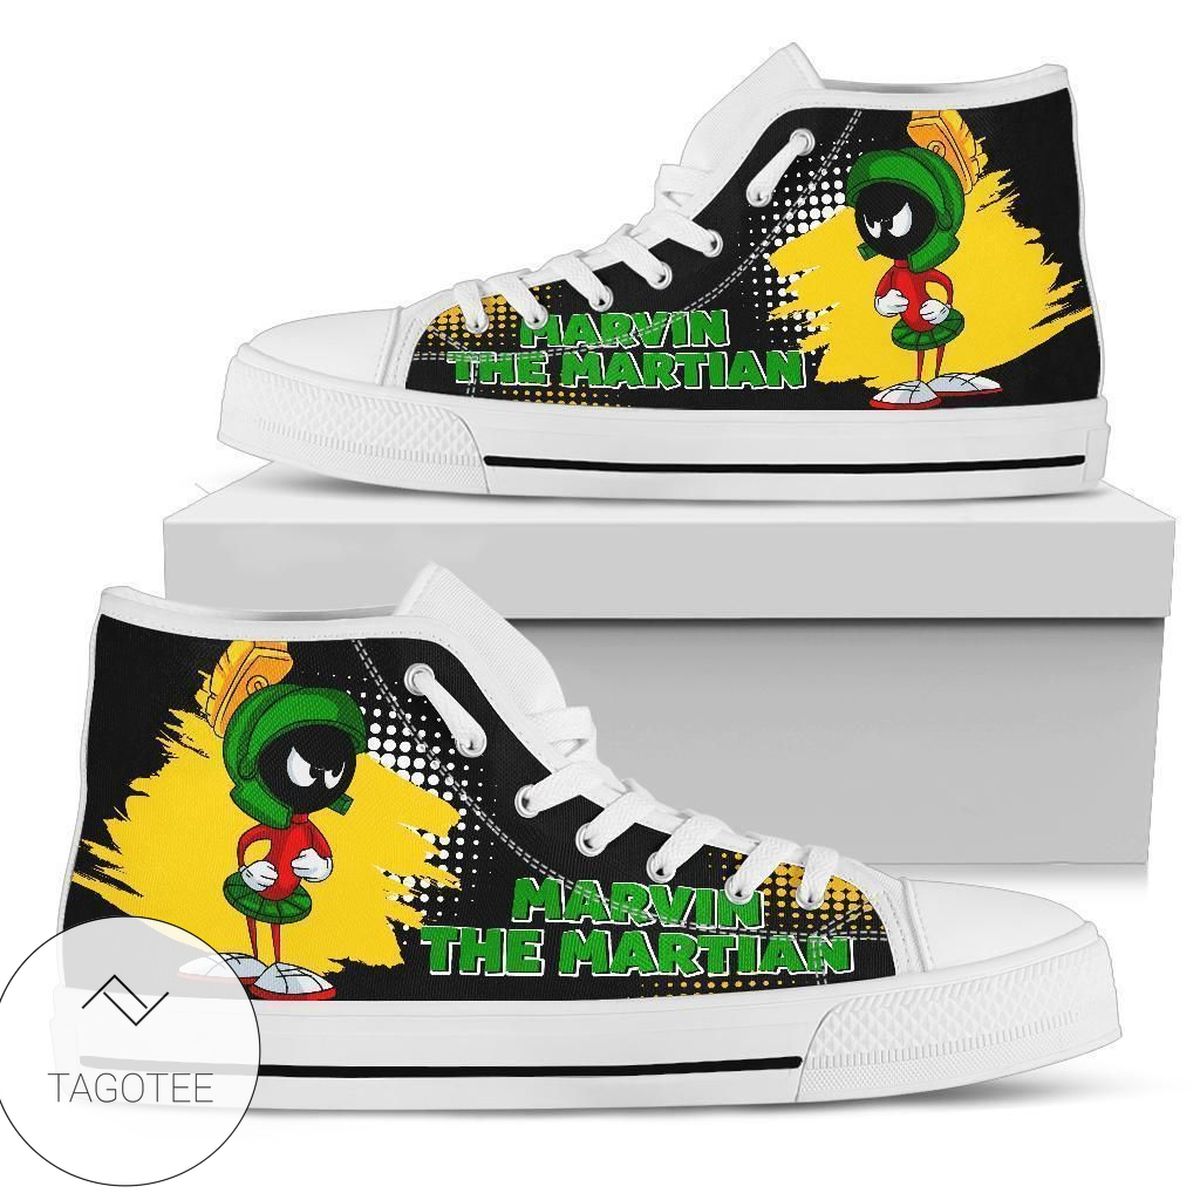 Marvin The Martian Sneakers High Top Shoes Cartoon High Top Shoes